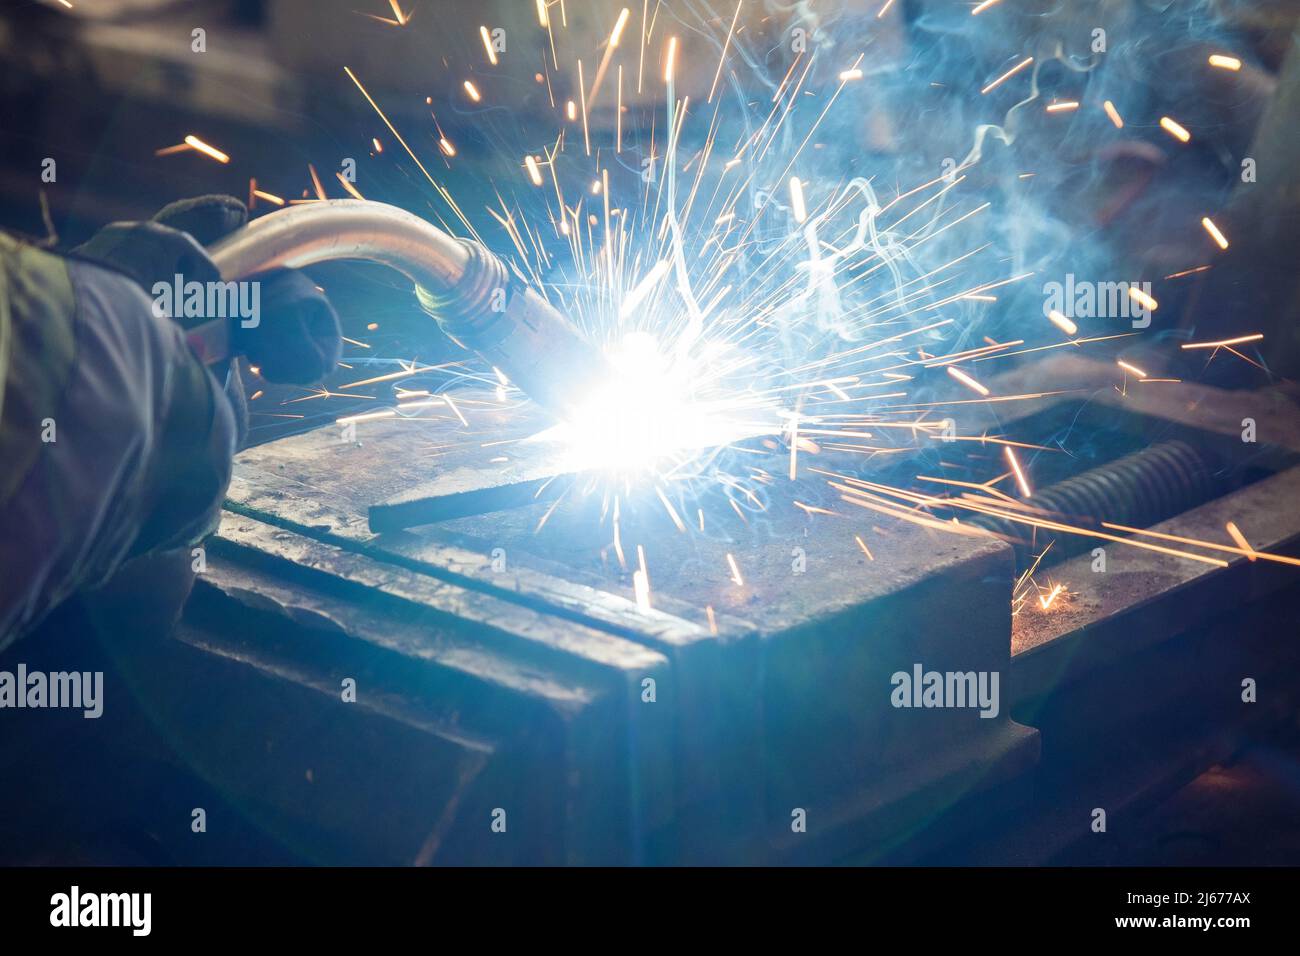 Welding of steel, sparking, not wearing gloves, light colored like fireworks Stock Photo